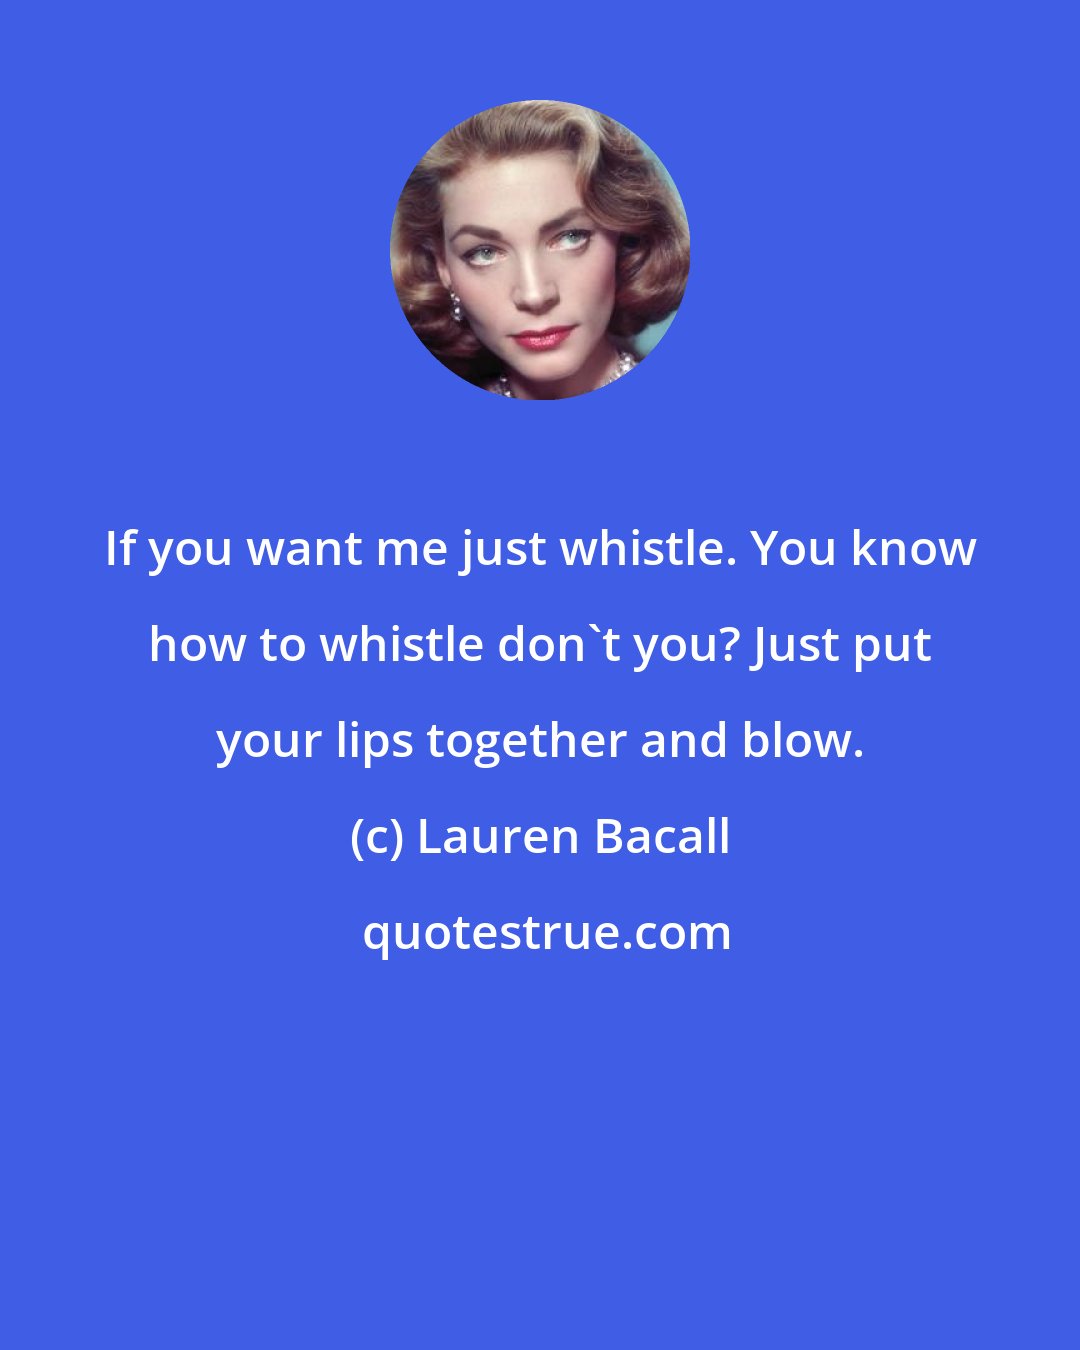 Lauren Bacall: If you want me just whistle. You know how to whistle don't you? Just put your lips together and blow.